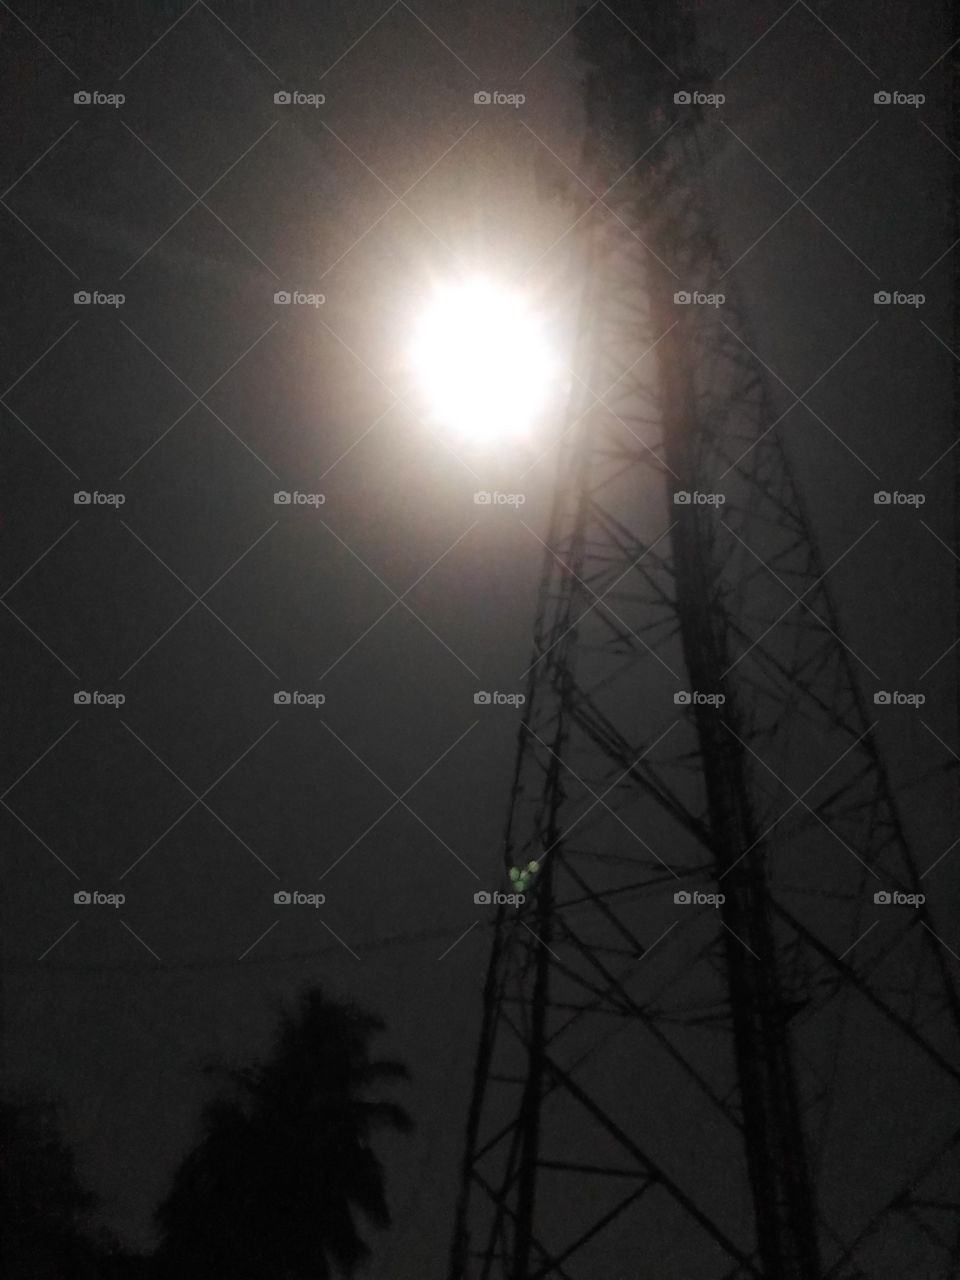 A mobile tower in the light of full moon night